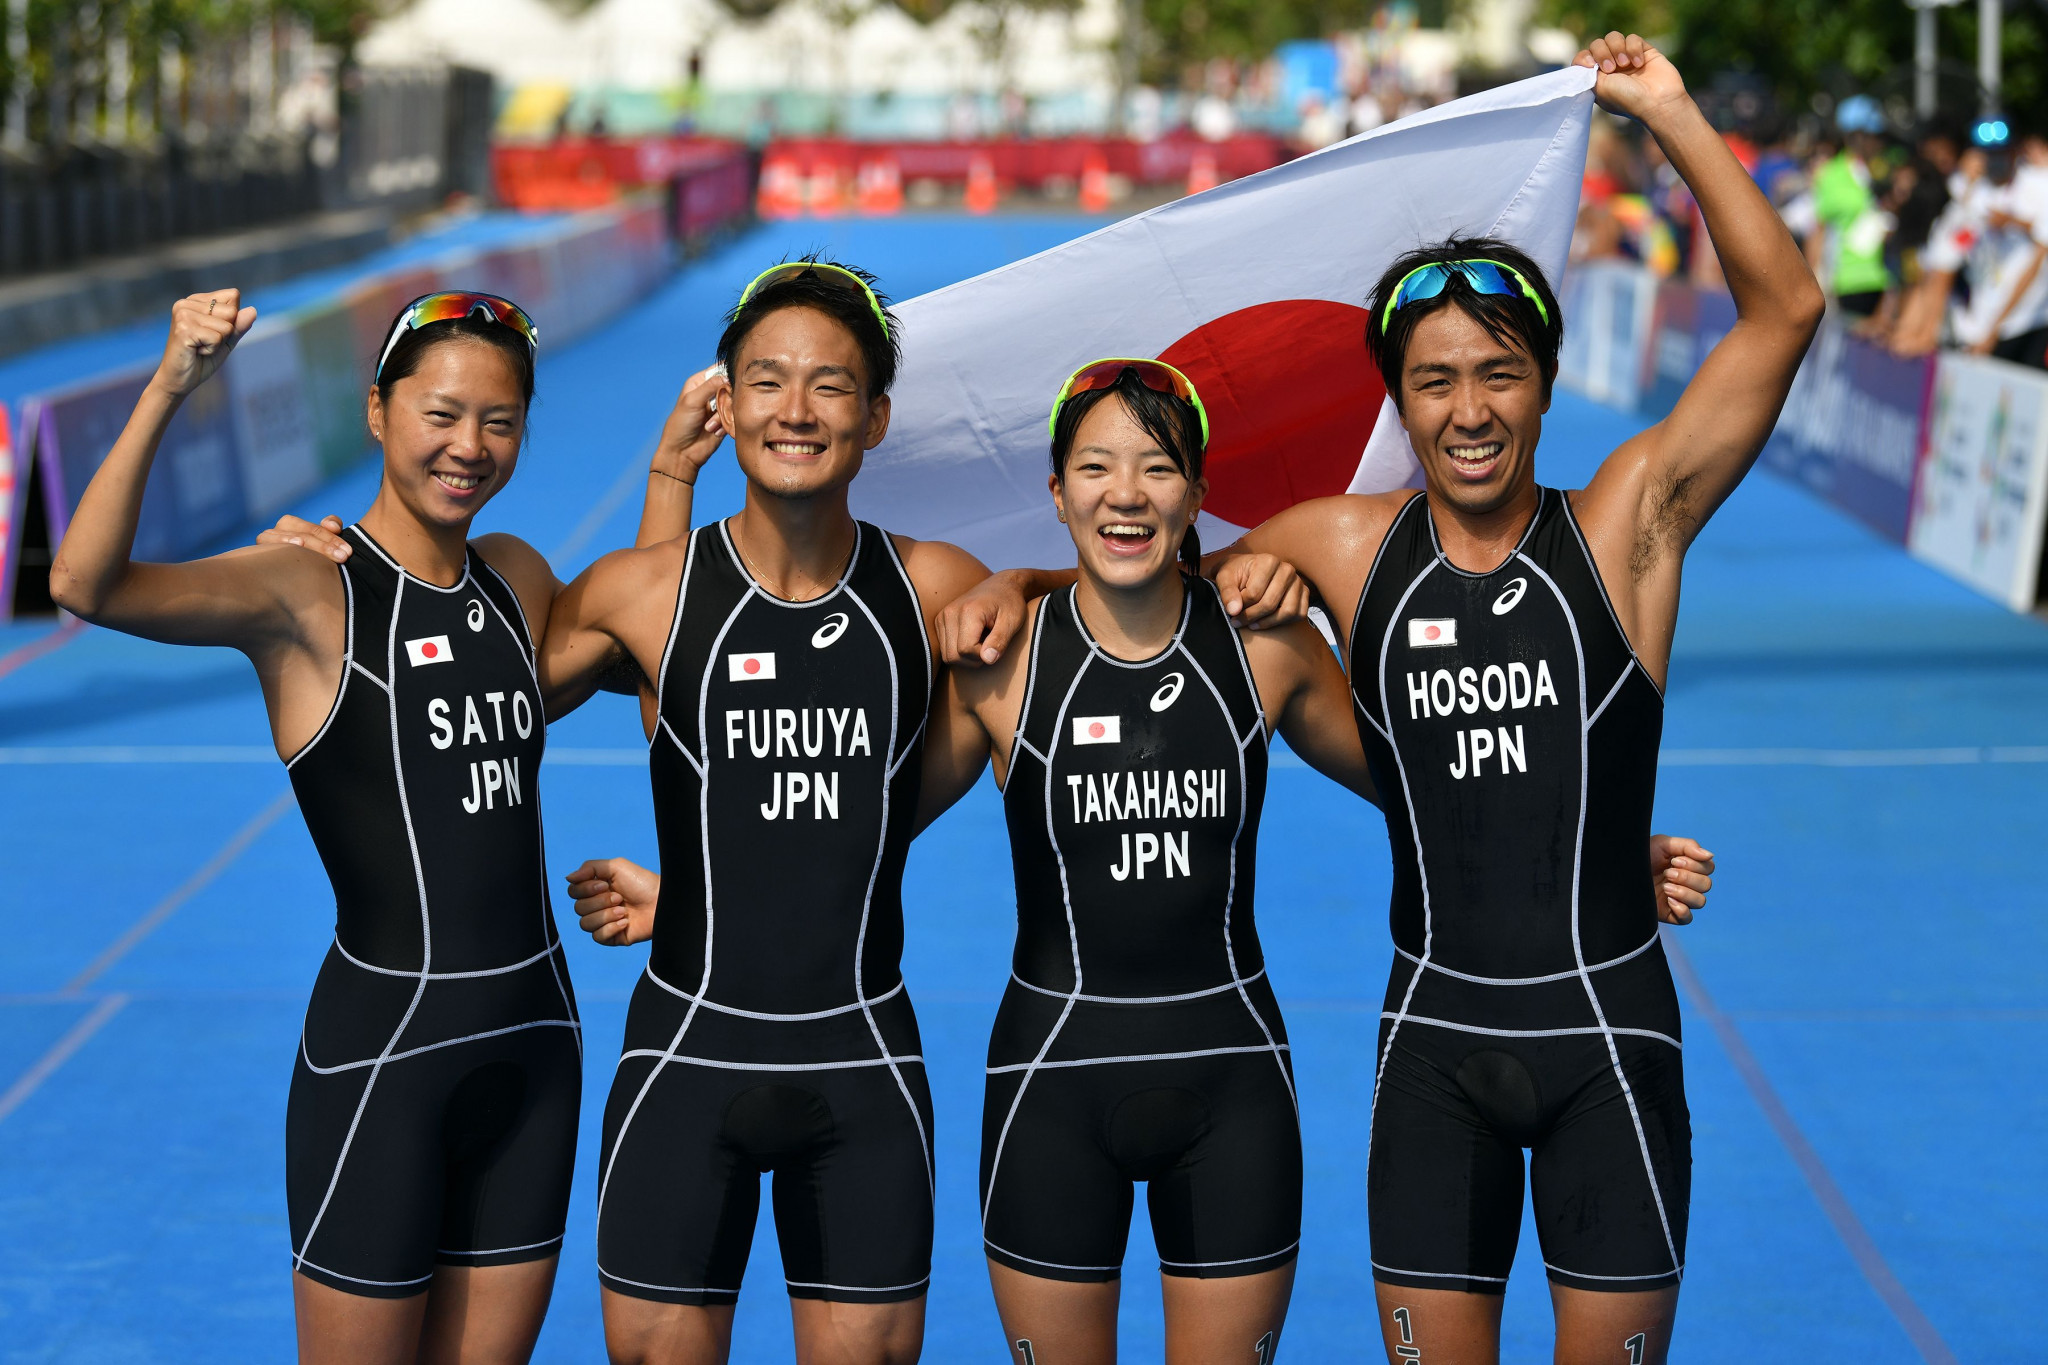 Japan claim final gold medal of 2018 Asian Games with mixed triathlon win 